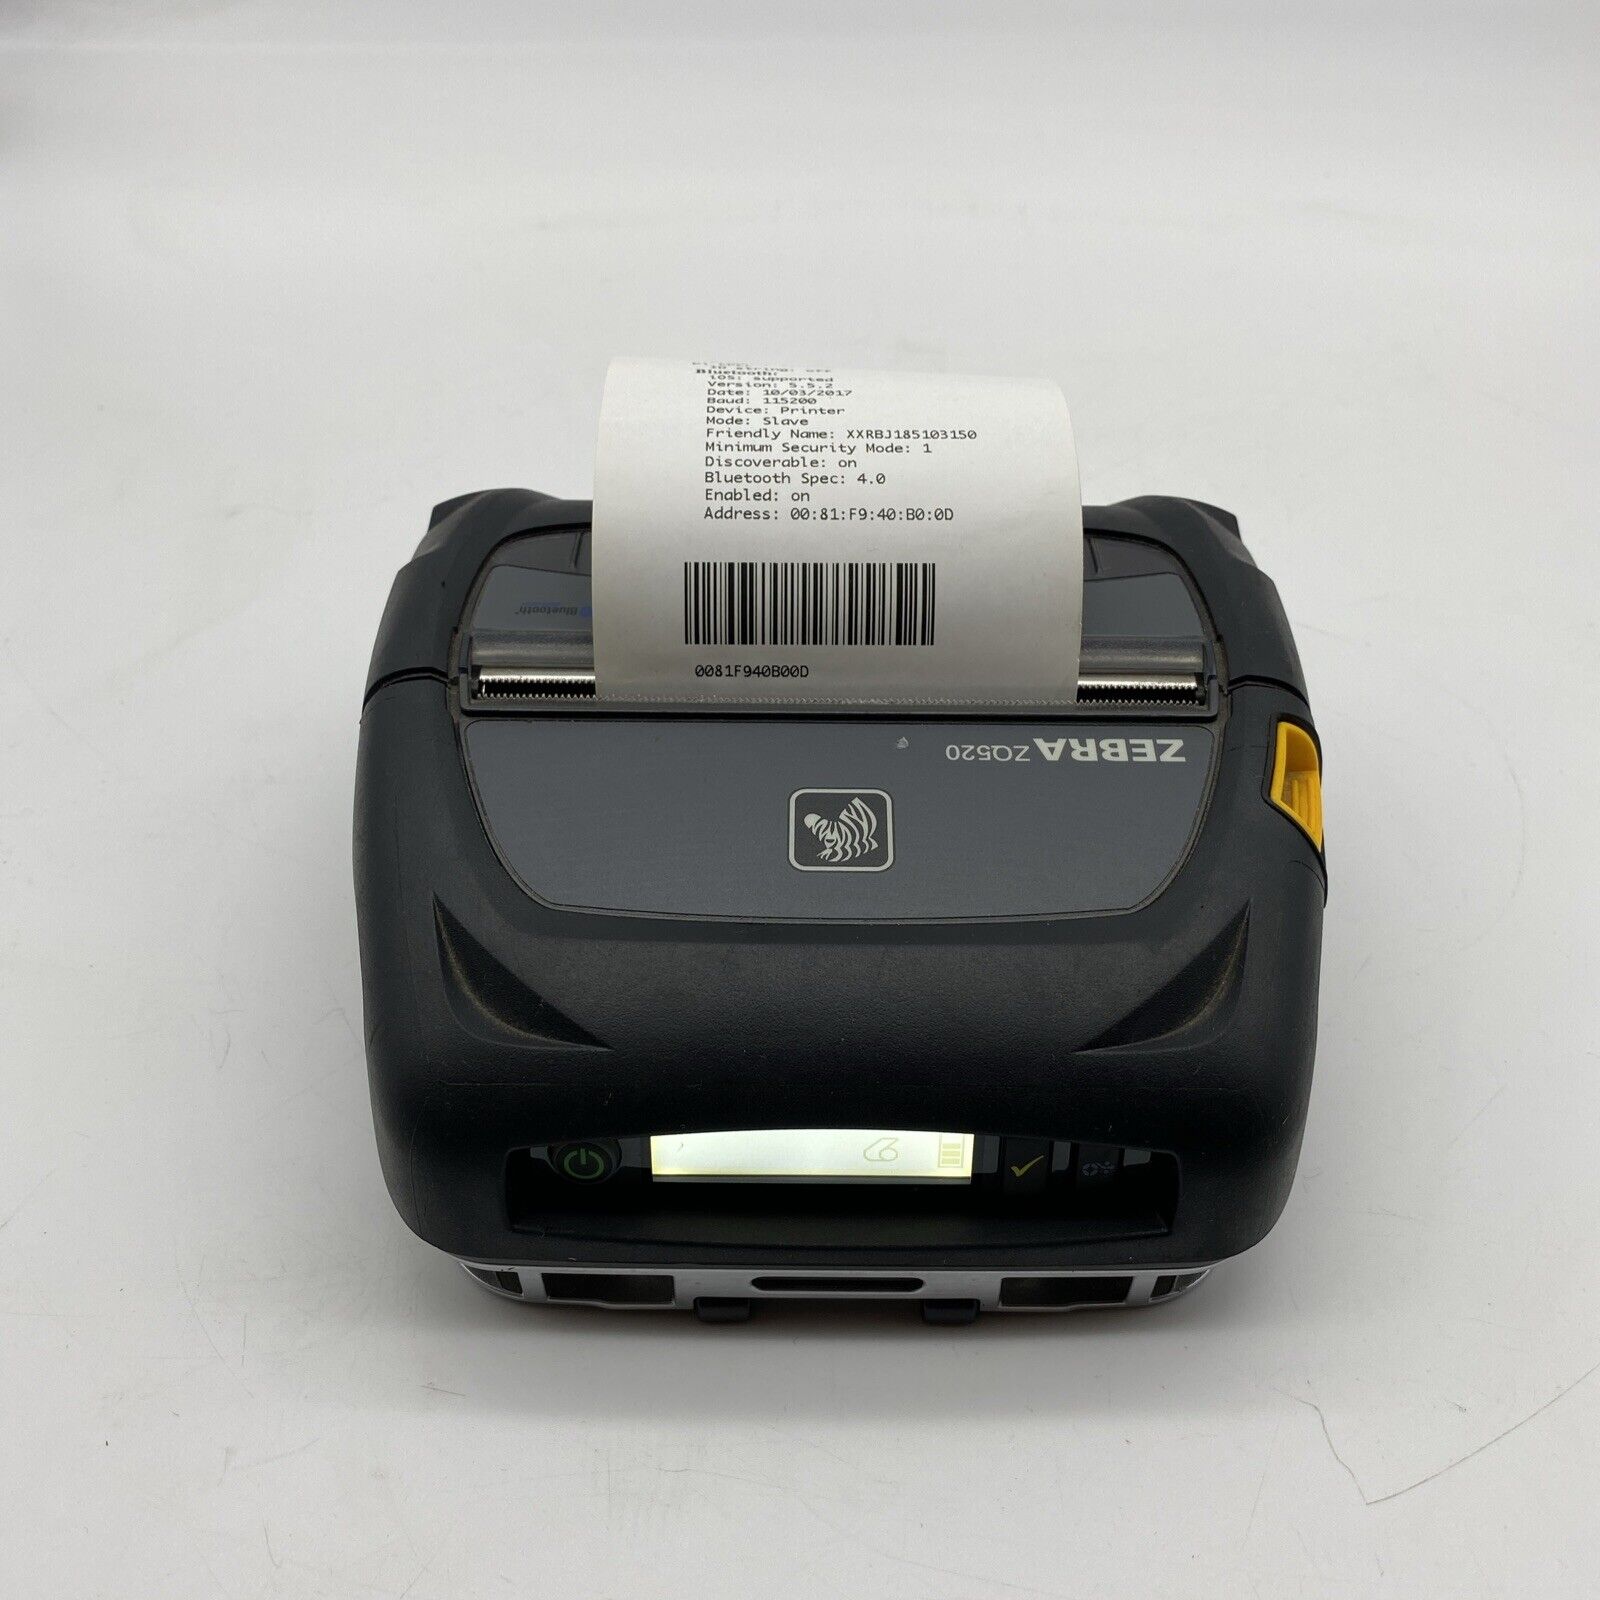 Zebra ZQ520 Mobile Barcode Thermal Printer Fully Tested w/Battery